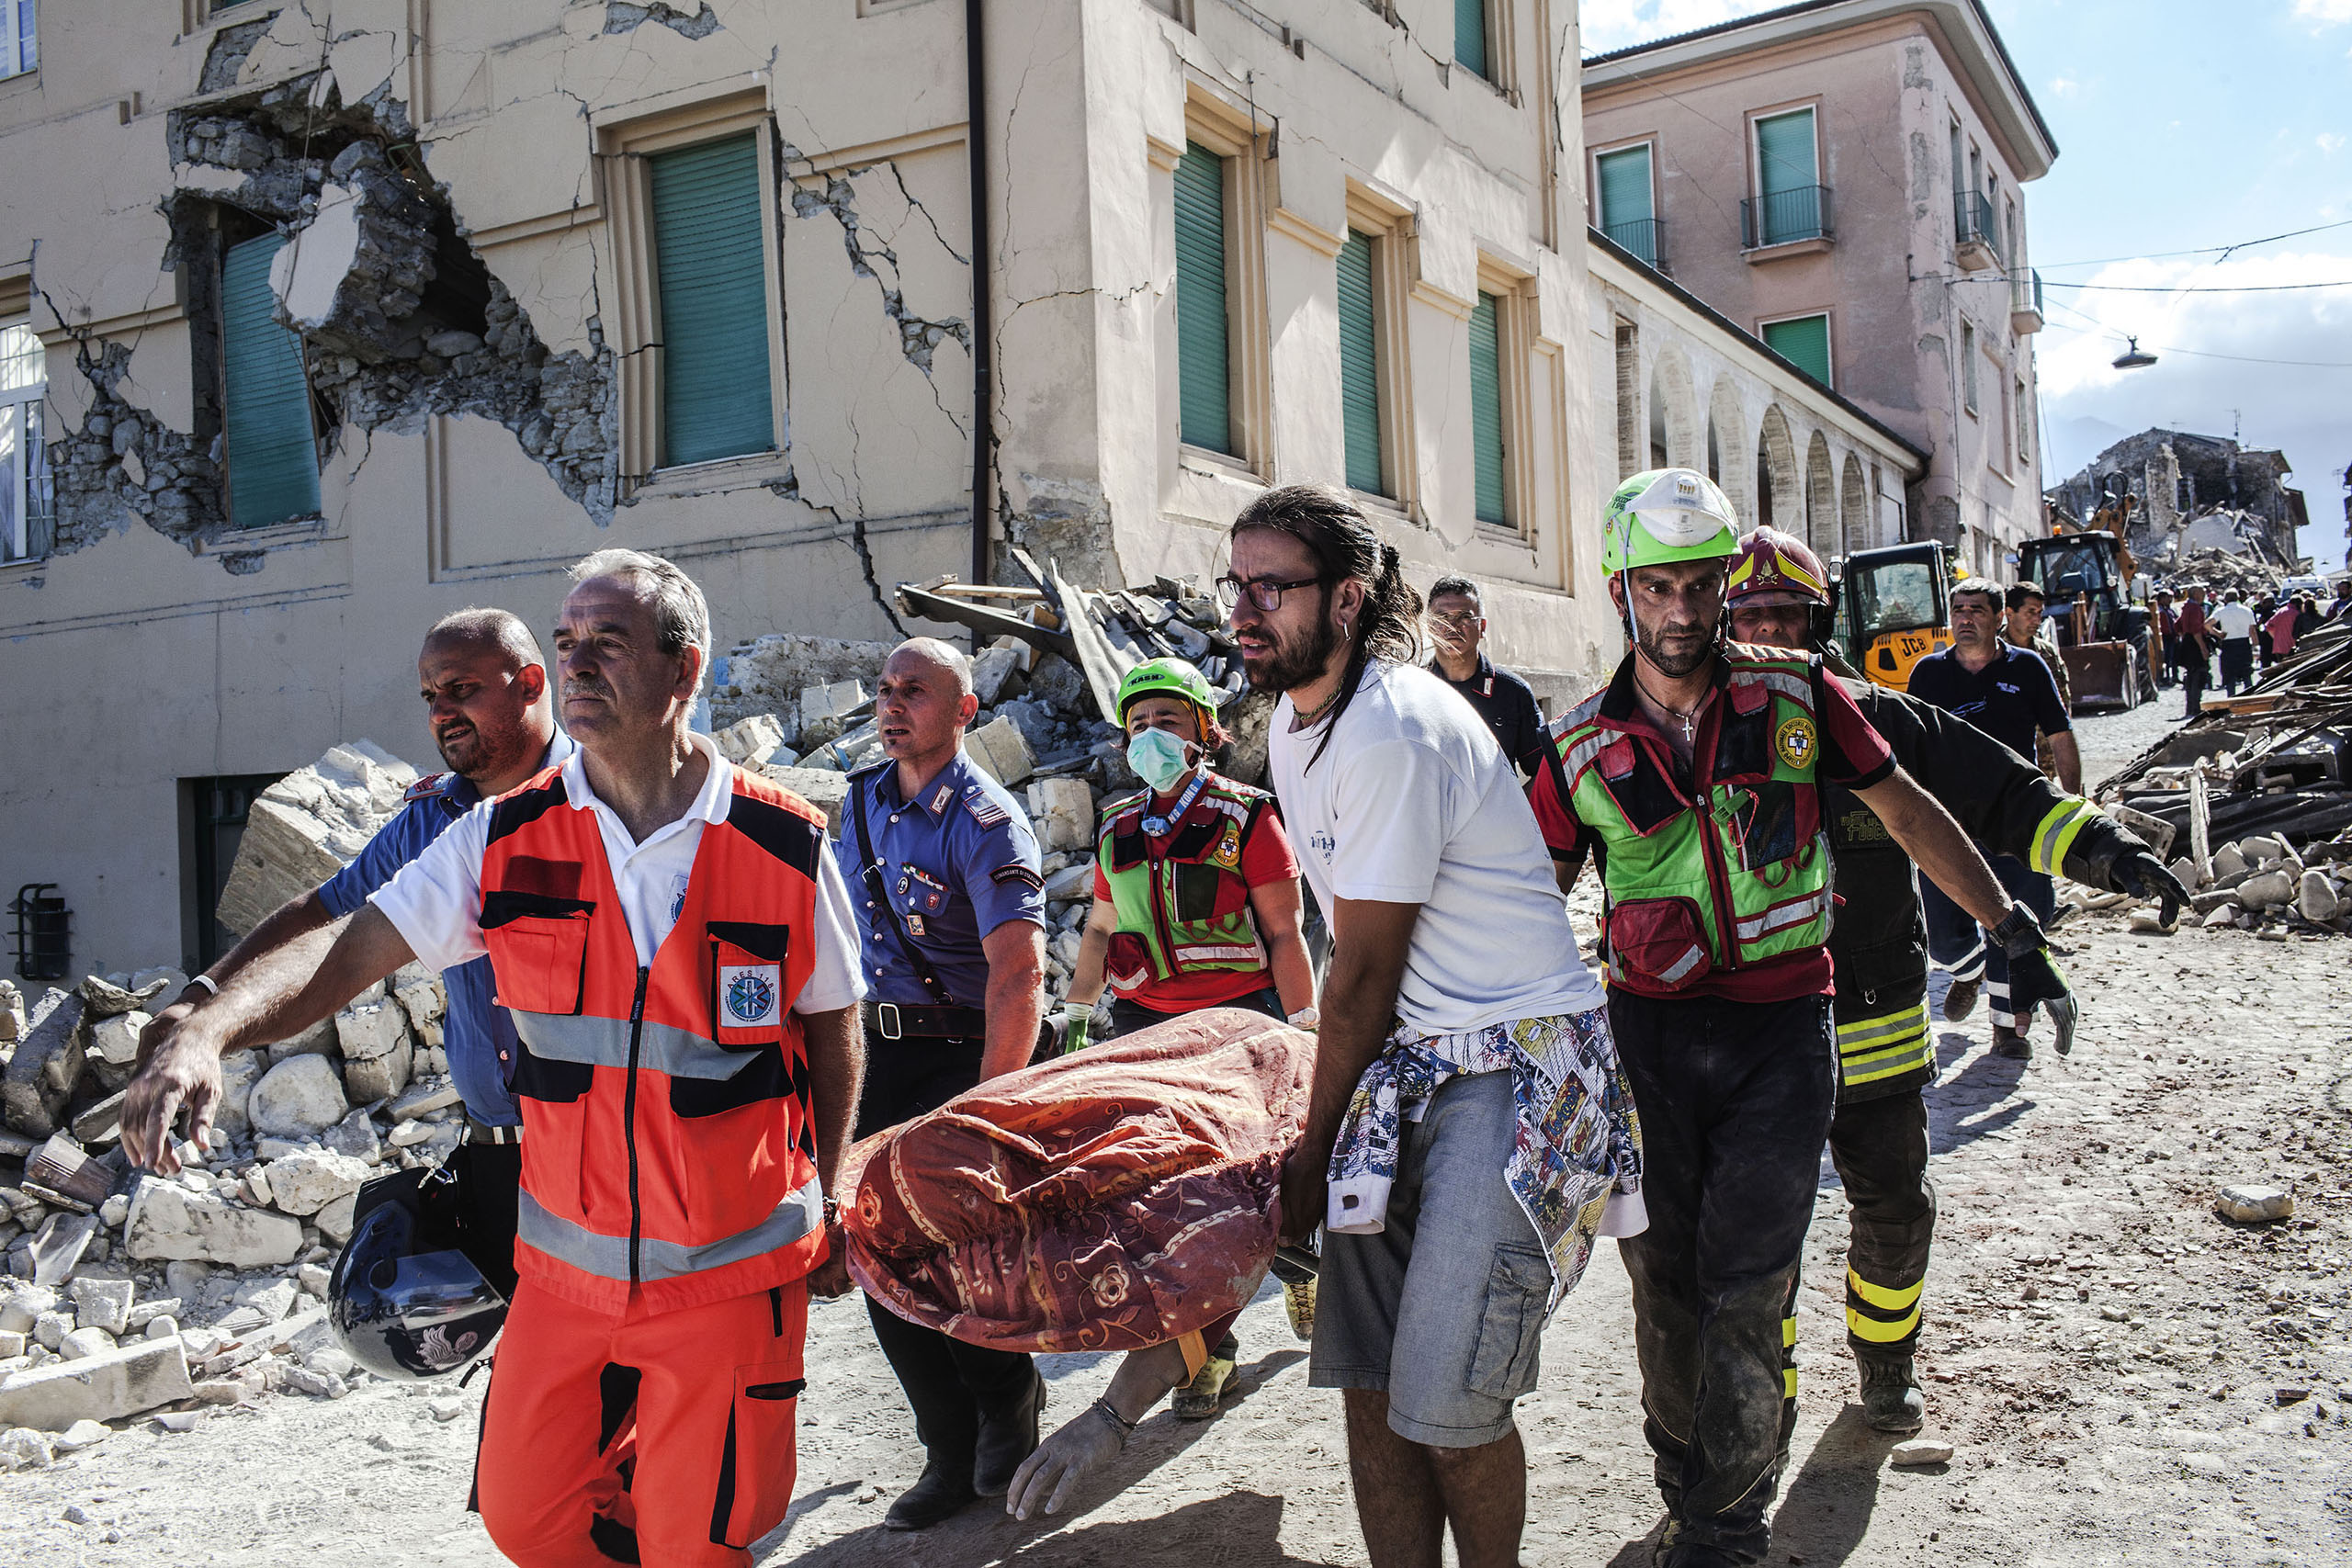 A body extracted from the rubble is carried on a stretcher in Amatrice, Italy, on Aug. 24, 2016.